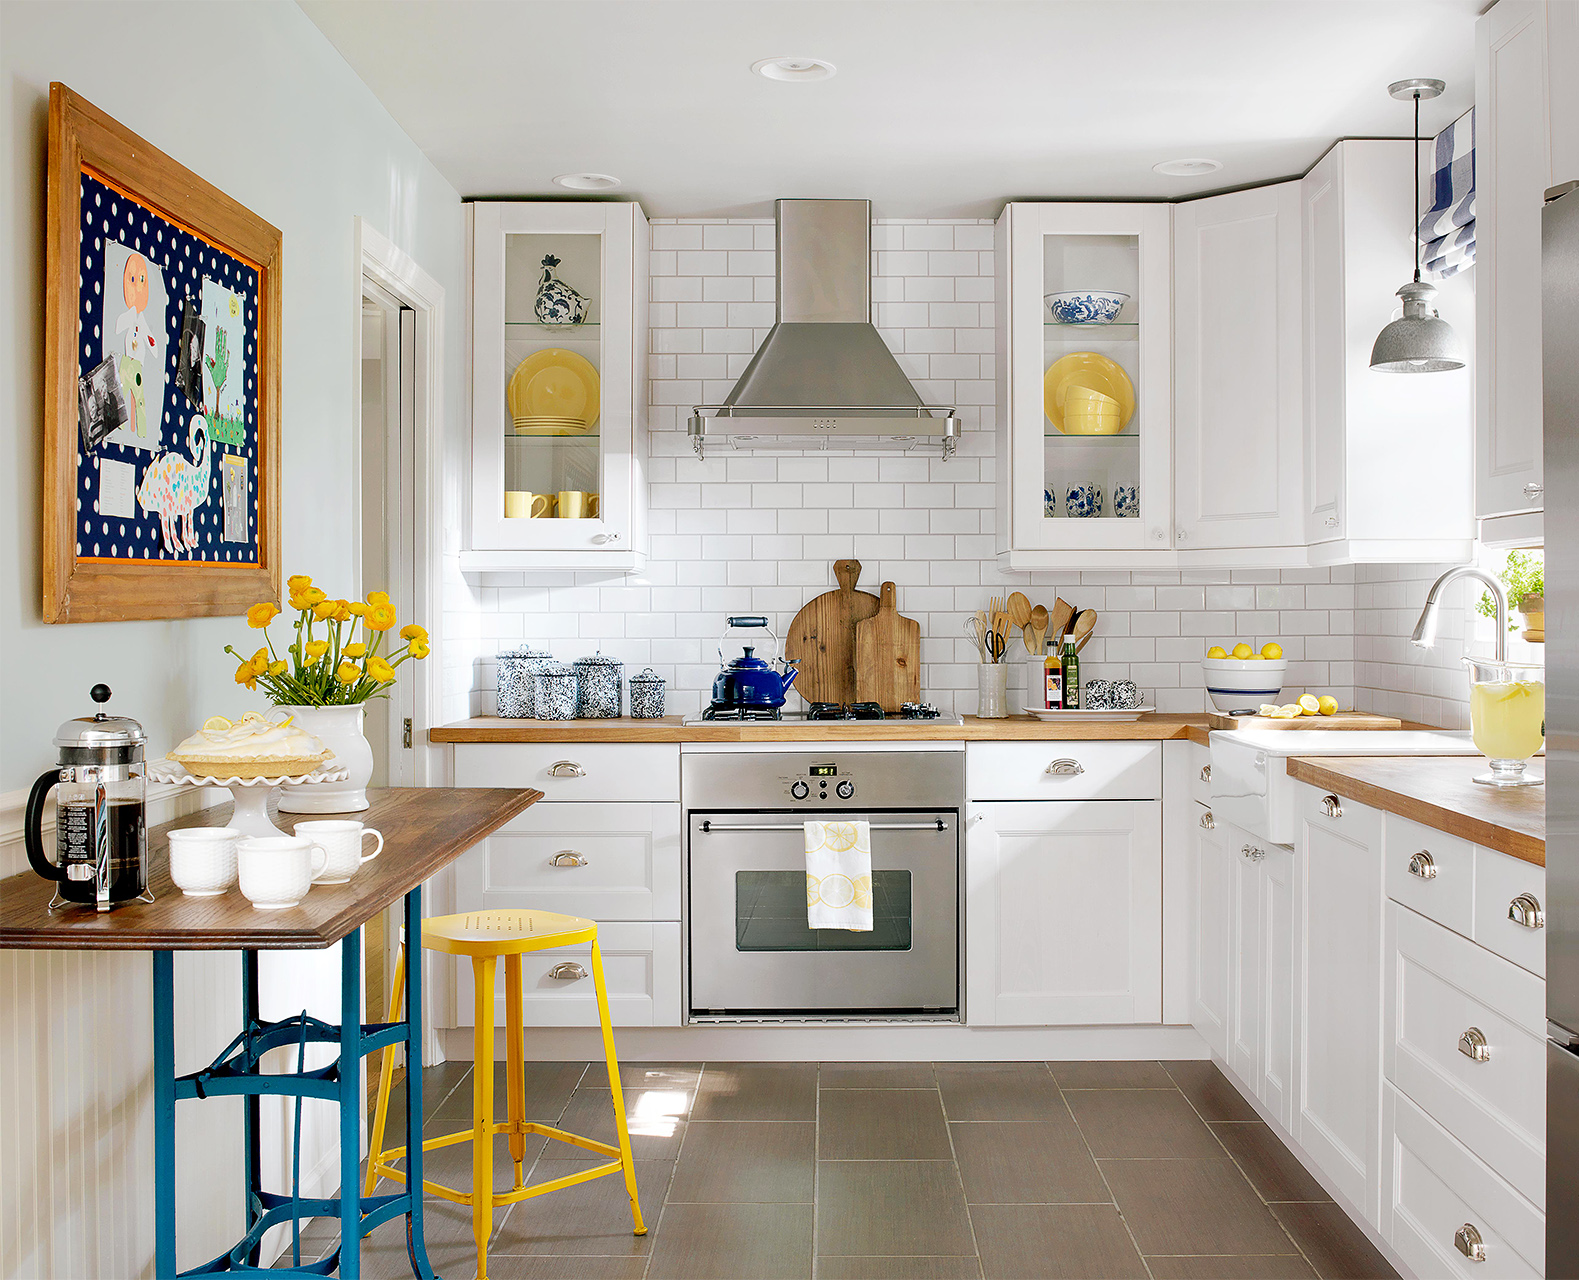 Decorating Strategies For Your Kitchen, How To Make A Small Kitchen Look Nice